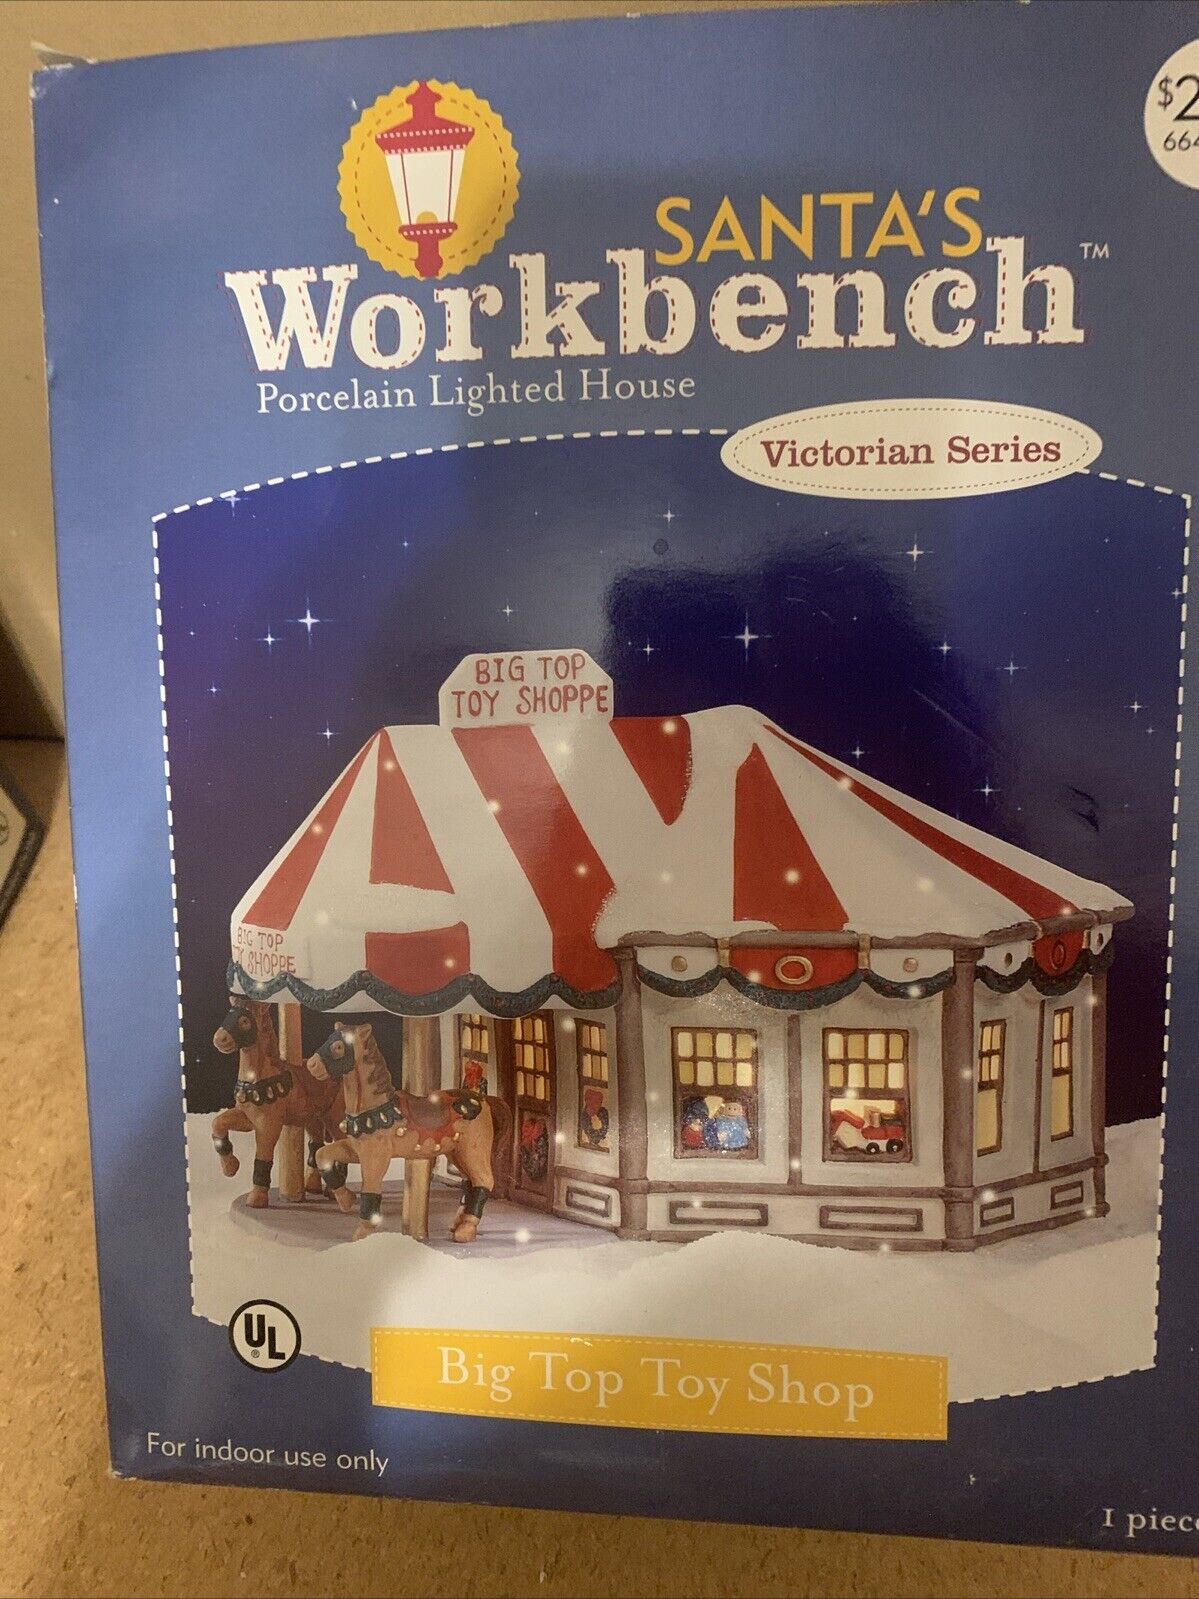 Santa’s Workbench Big Top Toy Shop Lighted Porcelain House Victorian Series 2003